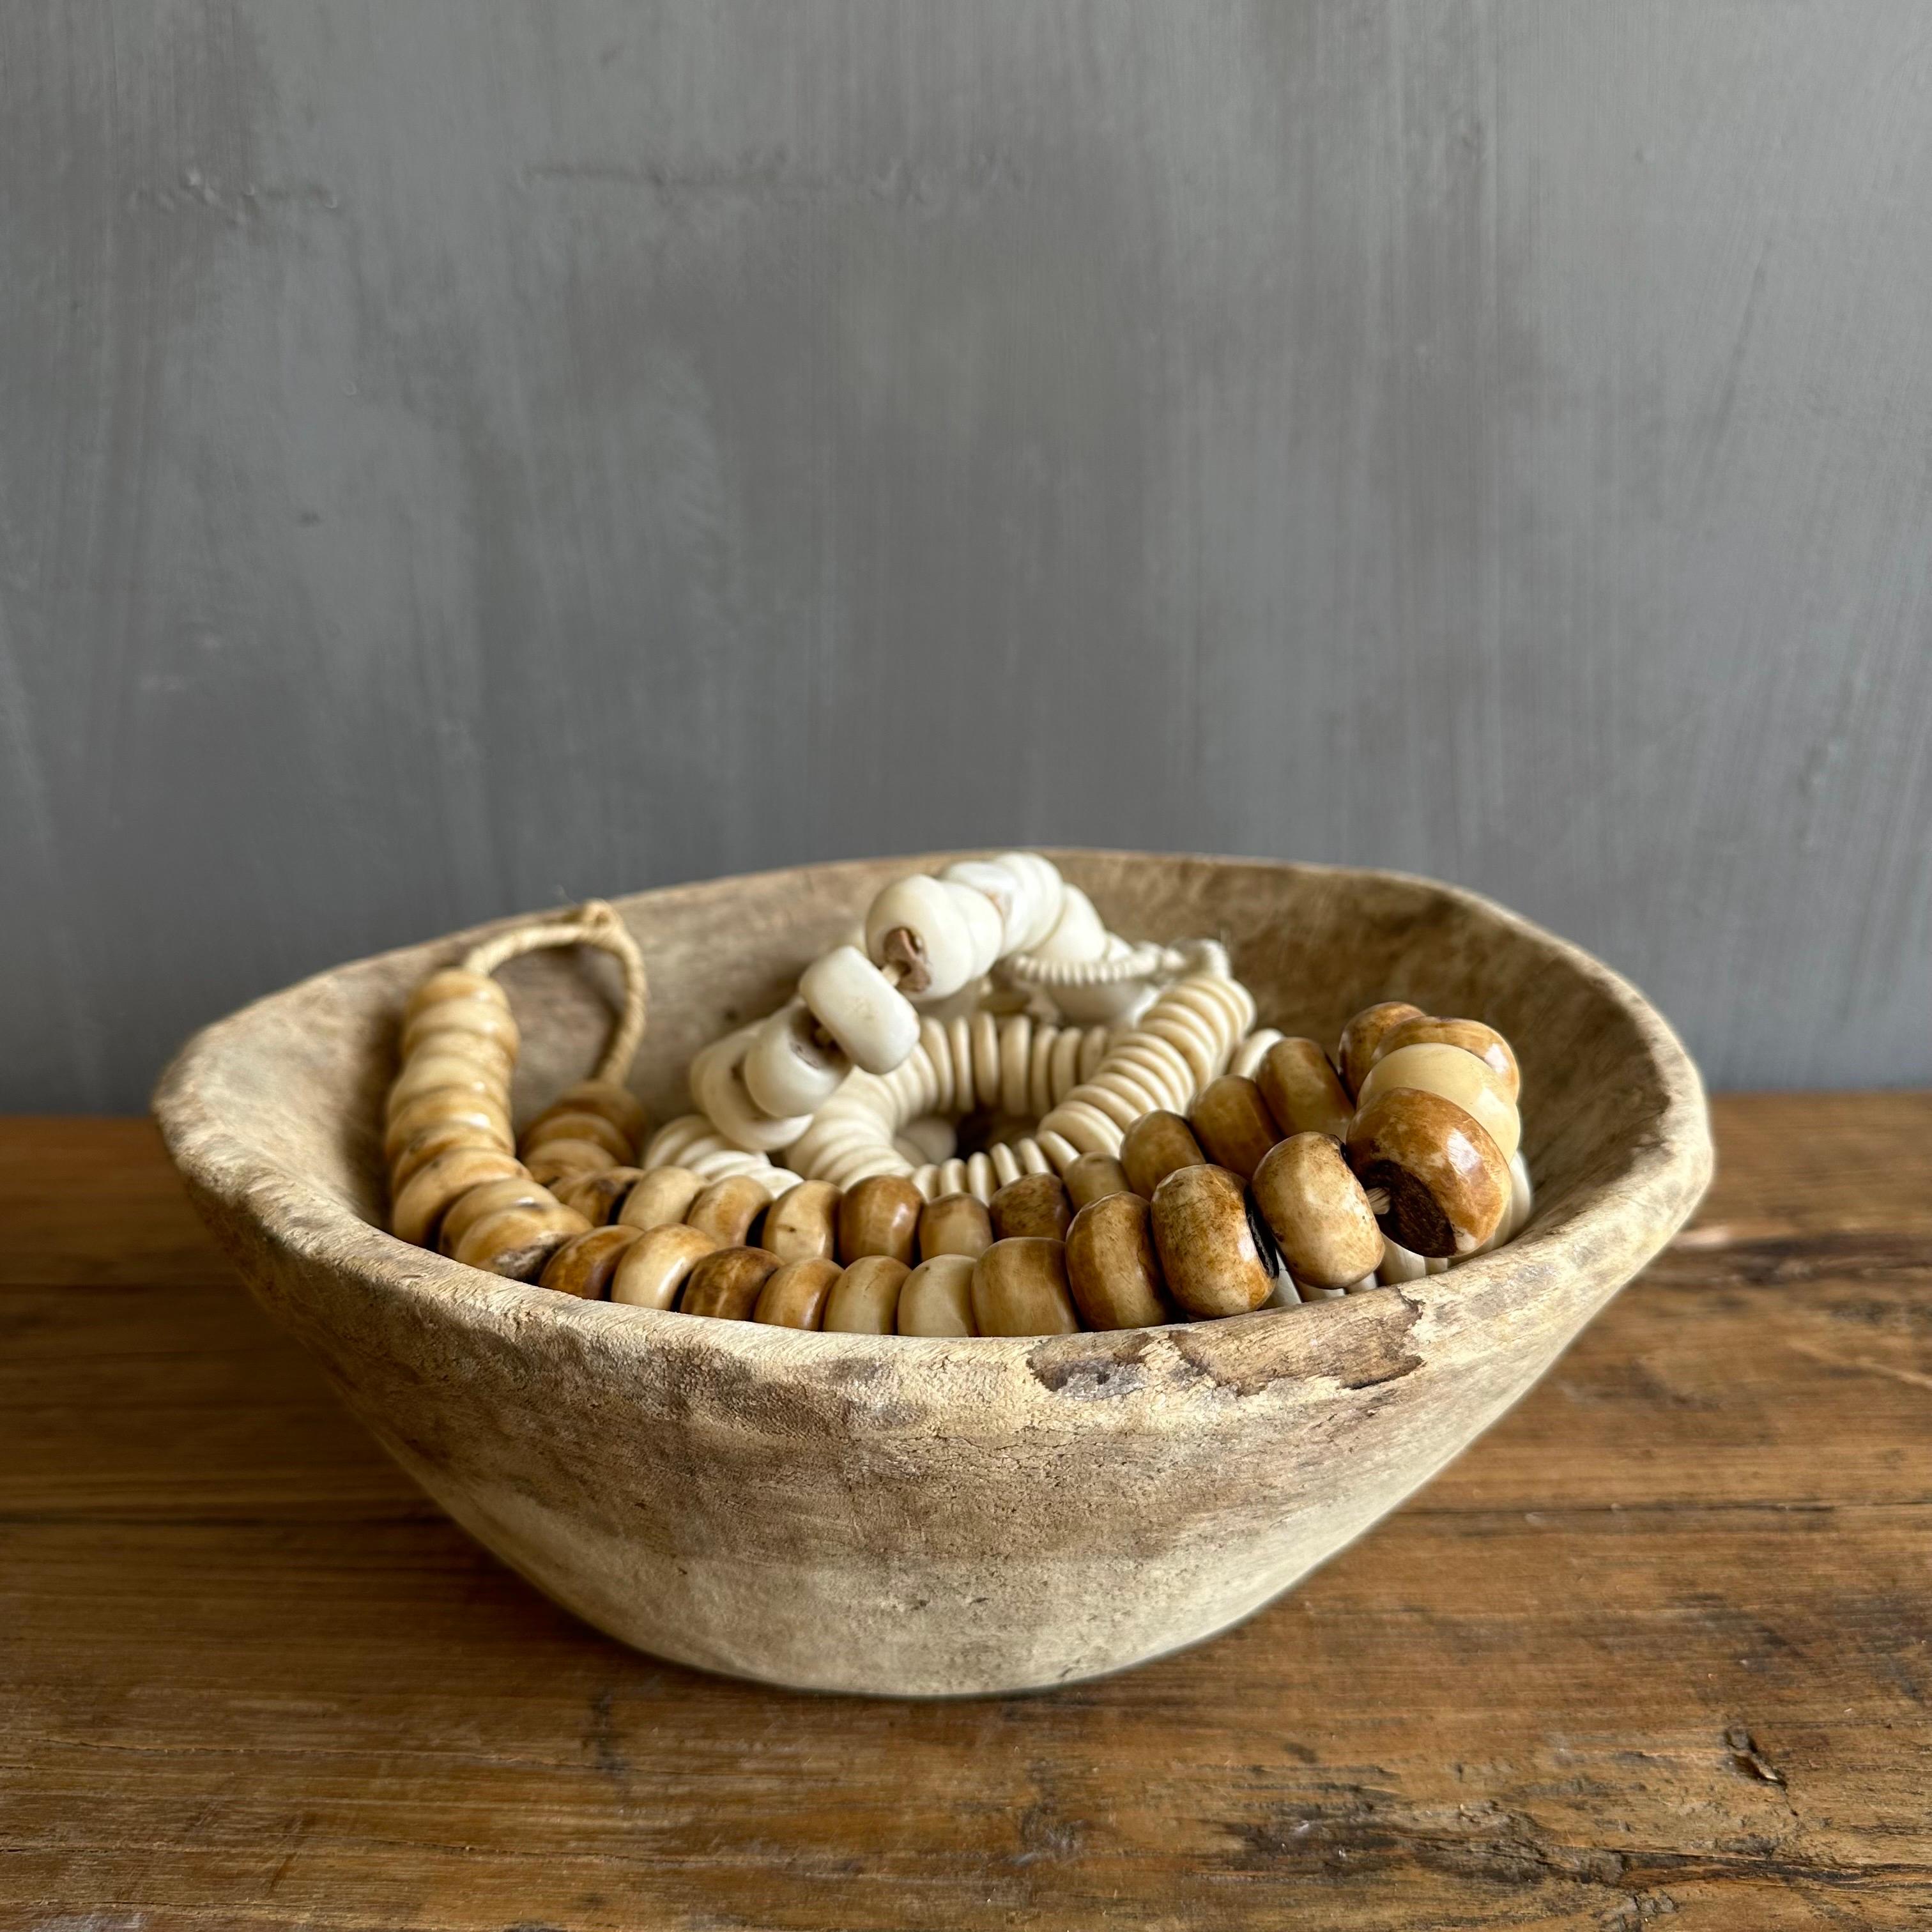 Large vintage decorative bowl. Use for countertops, or as and accent on a wall. Light weight, unfinished wood. Accessories not included. Size: 12” x 11” x4”.